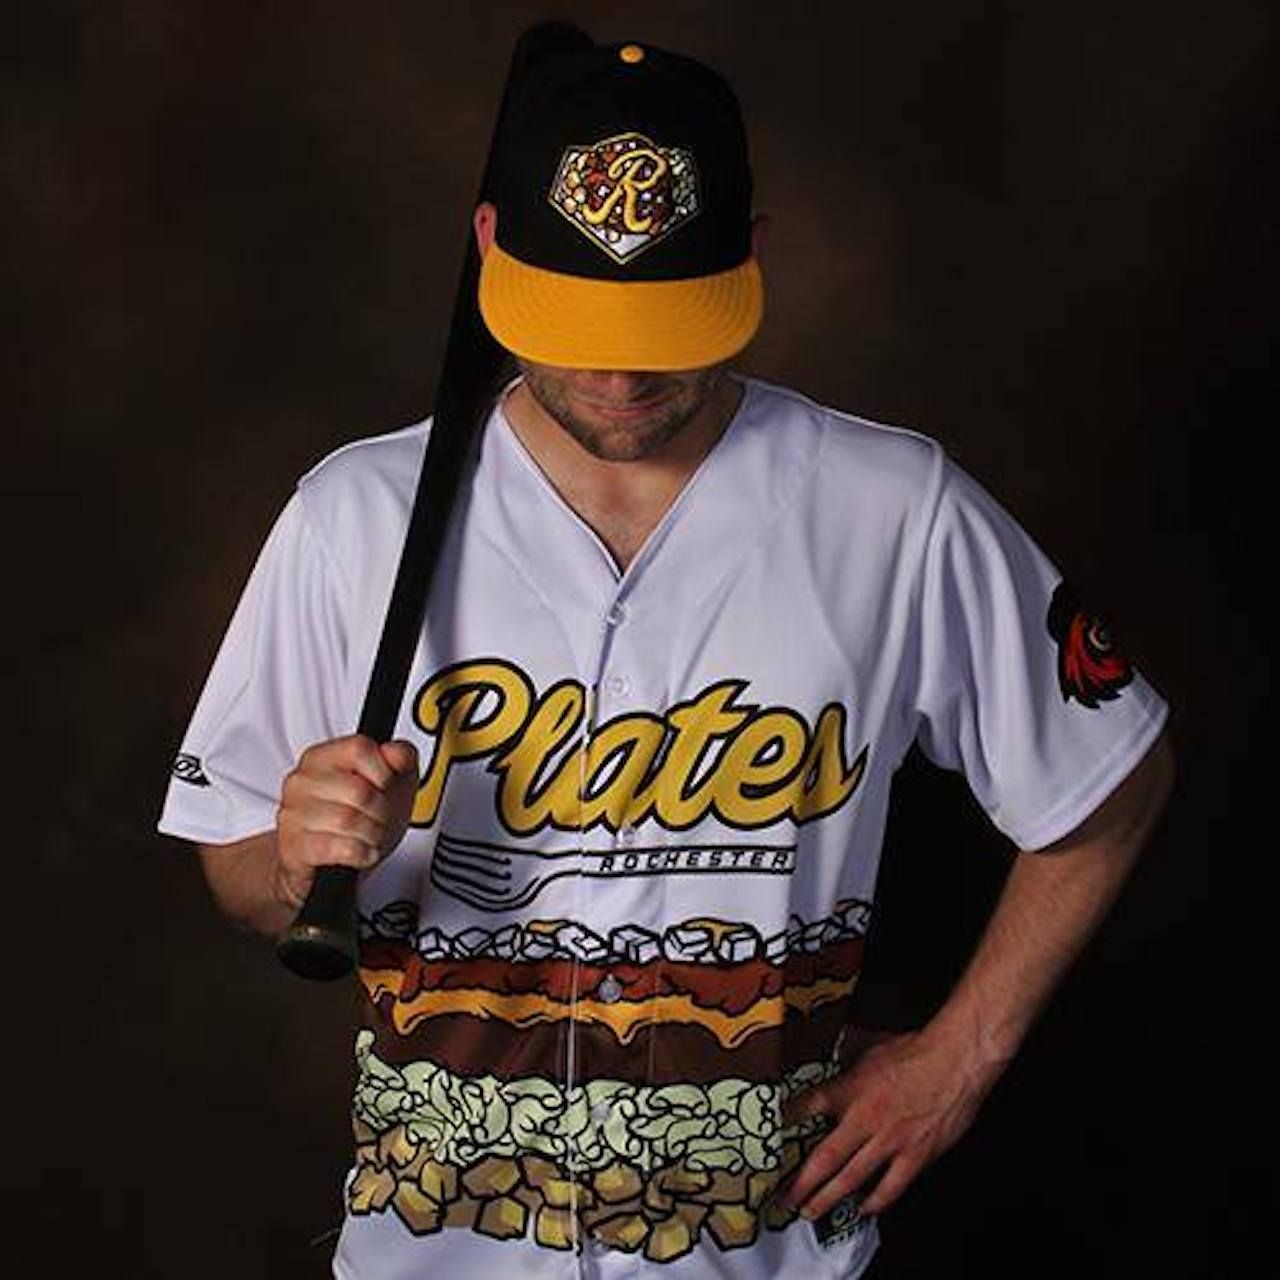 Rochester Red Wings baseball player wearing garbage plate jersey